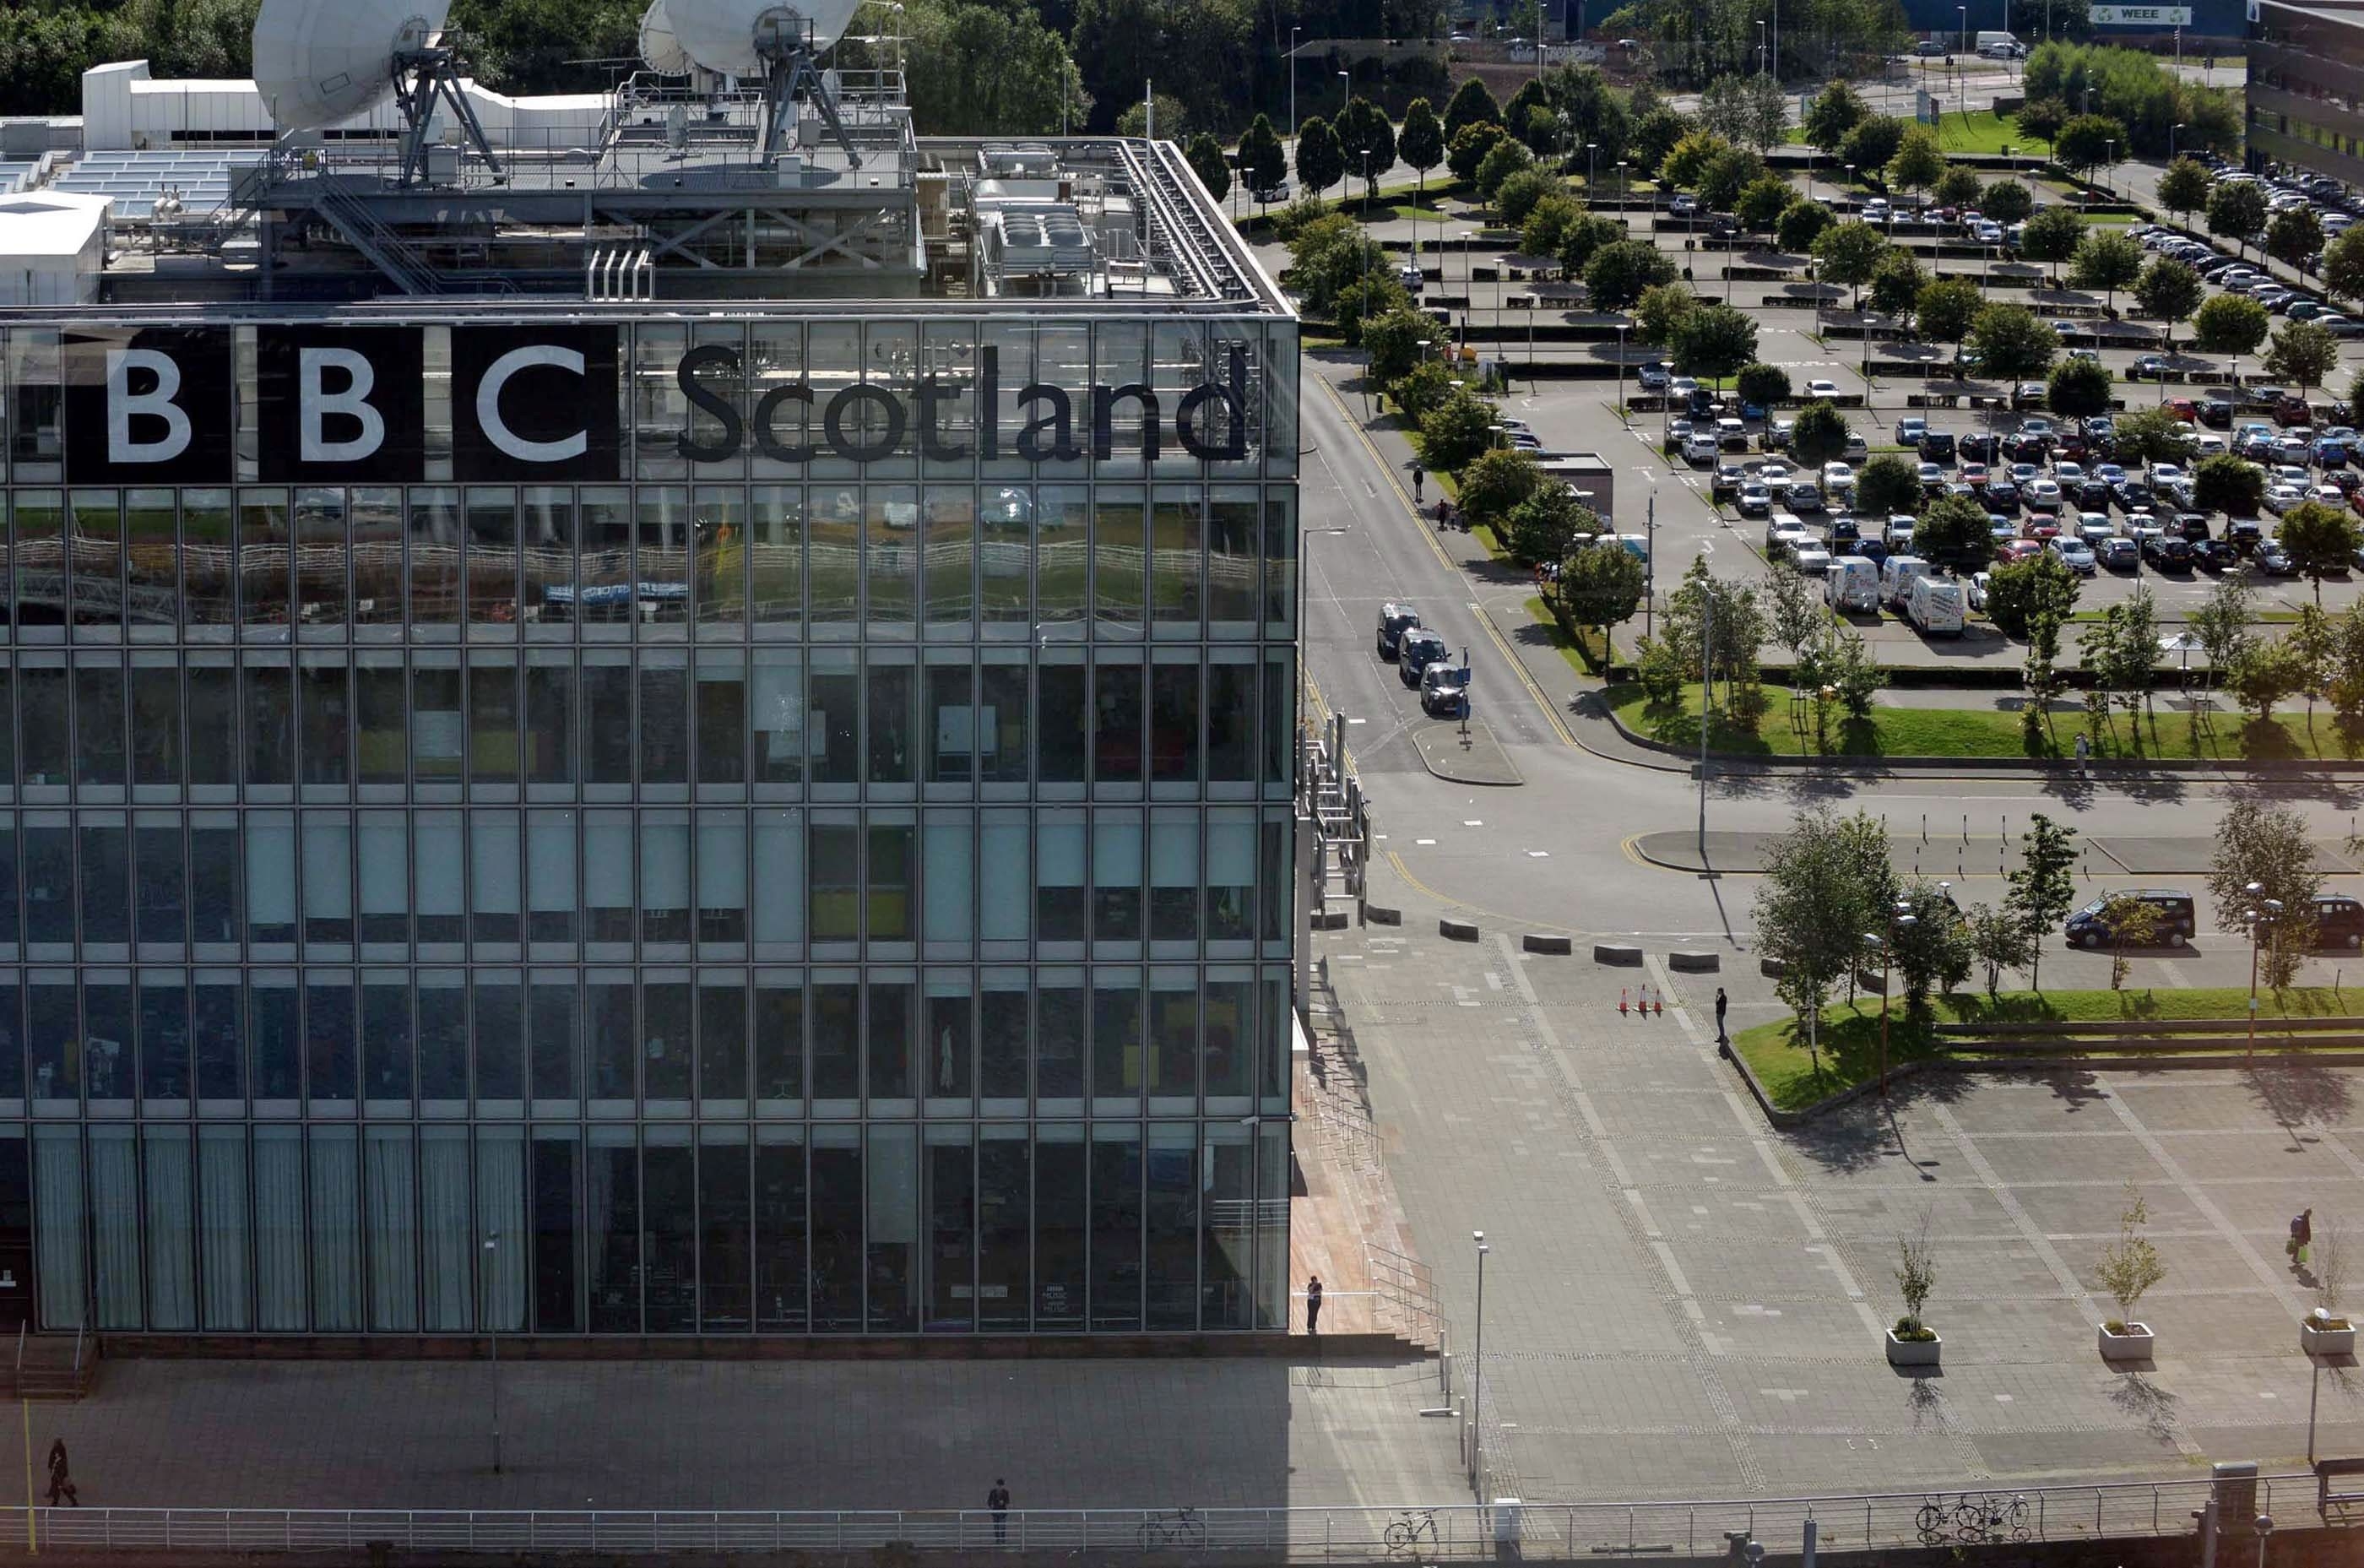 September 2015: Things looking a little quieter at the BBC headquarters on the banks of the River Clyde. 